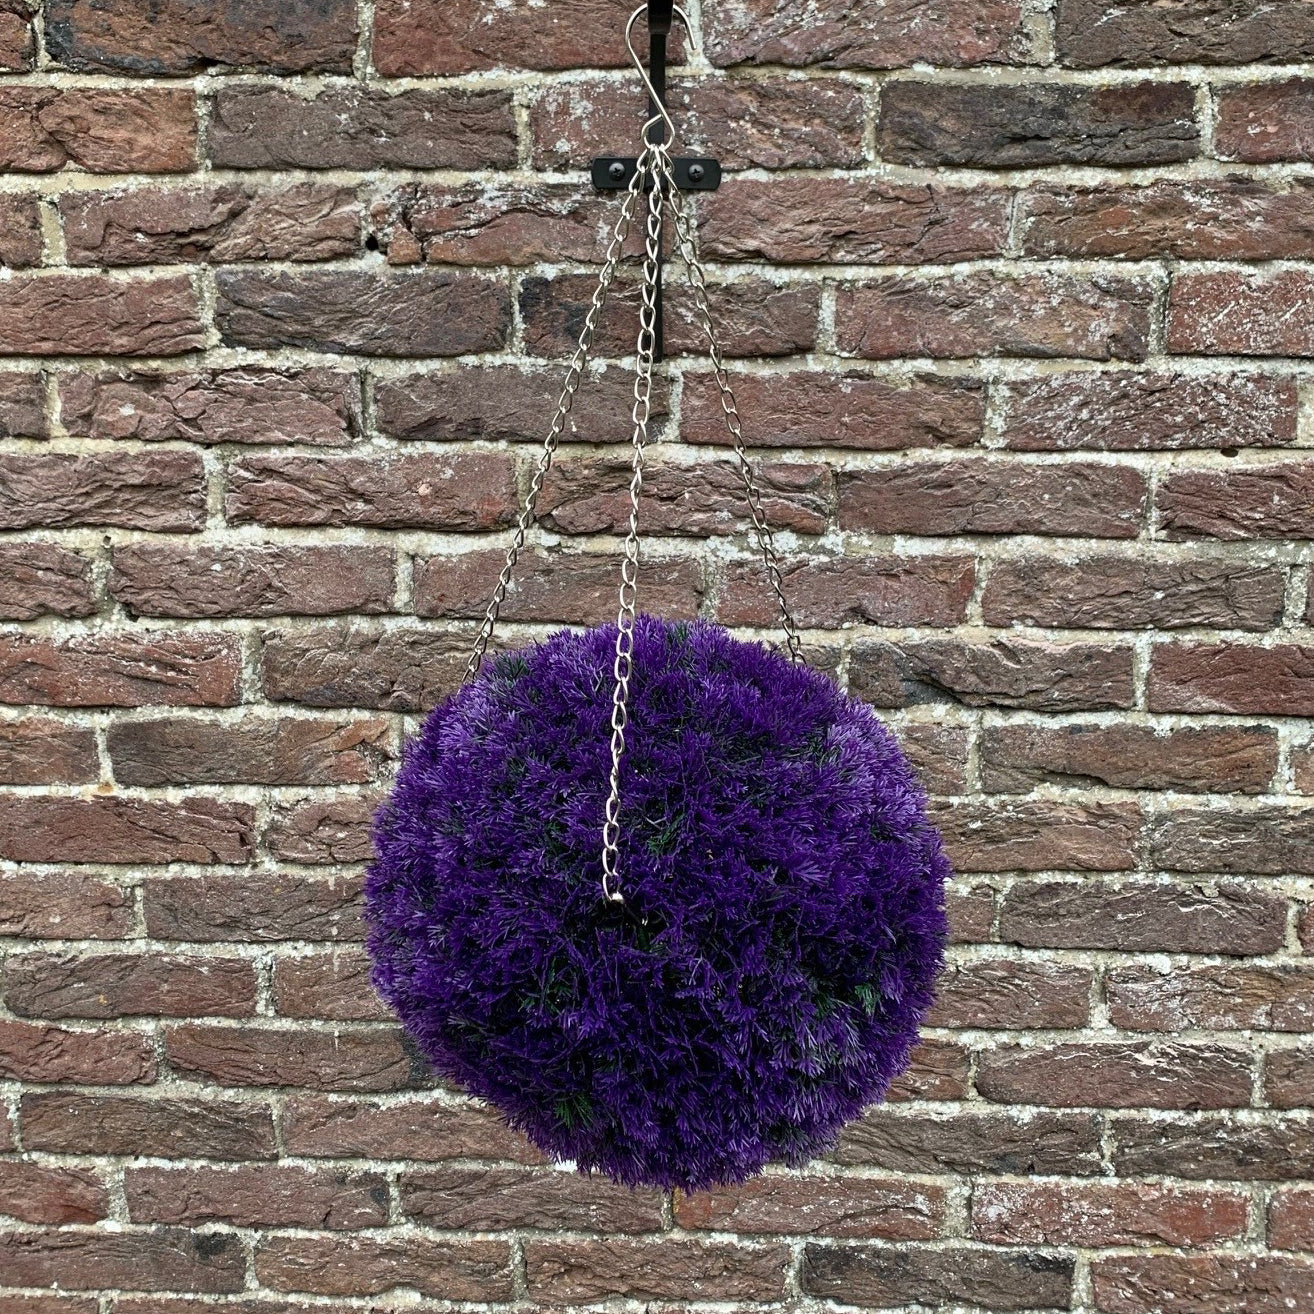 Purple Heather Effect Artificial Topiary Ball (26cm)